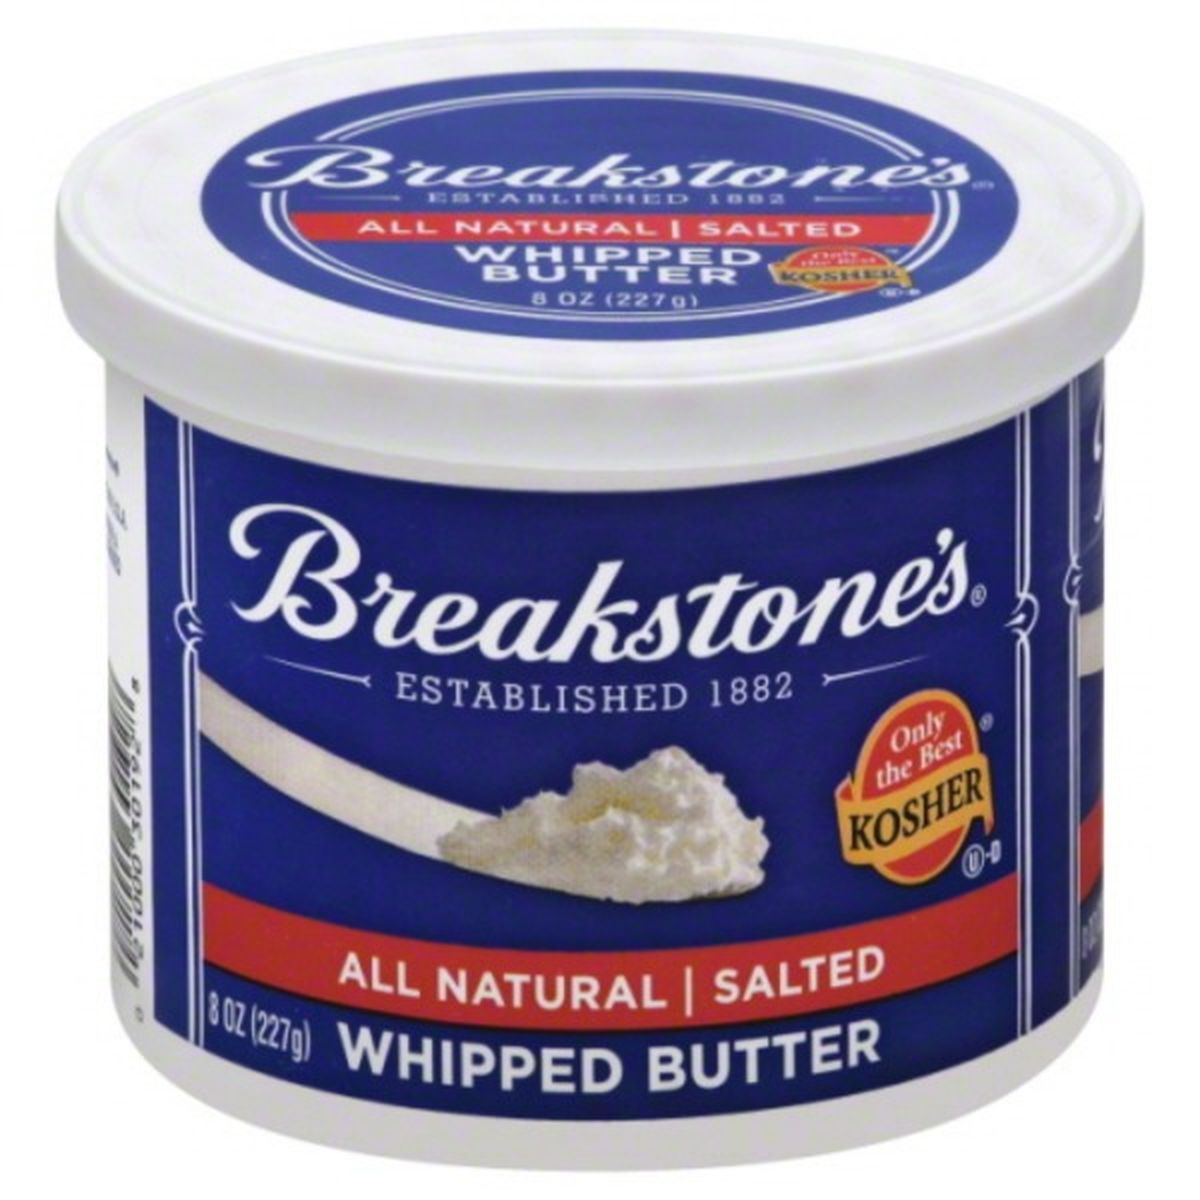 Calories in Breakstone's Butter, Whipped, Salted